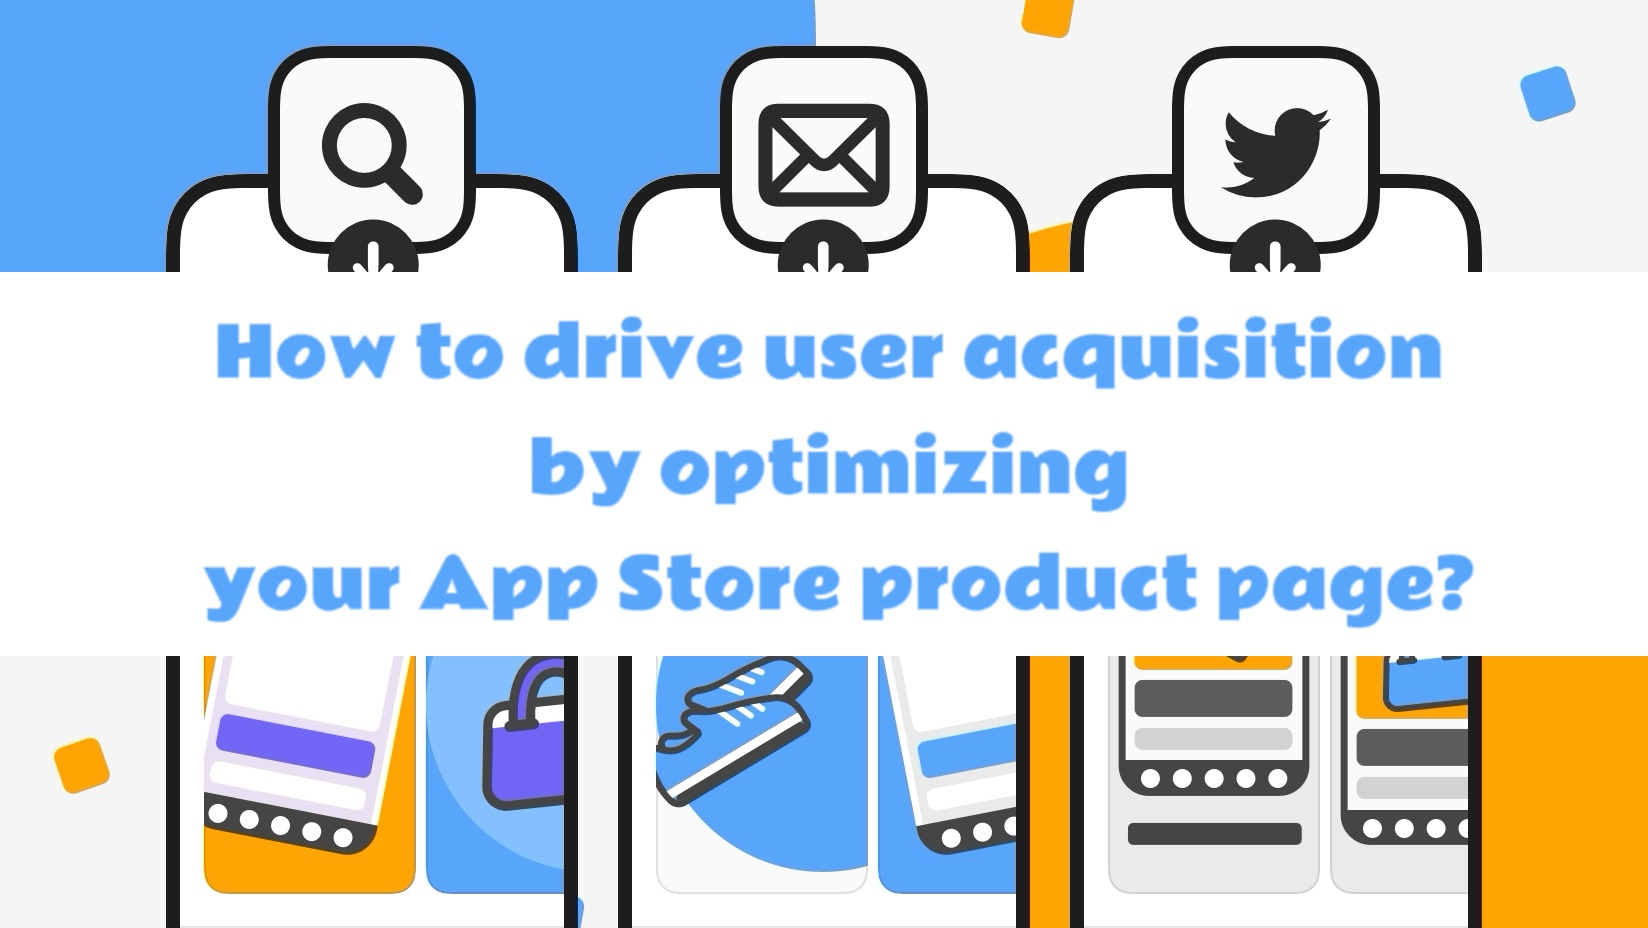 Optimizing App Store Product Page